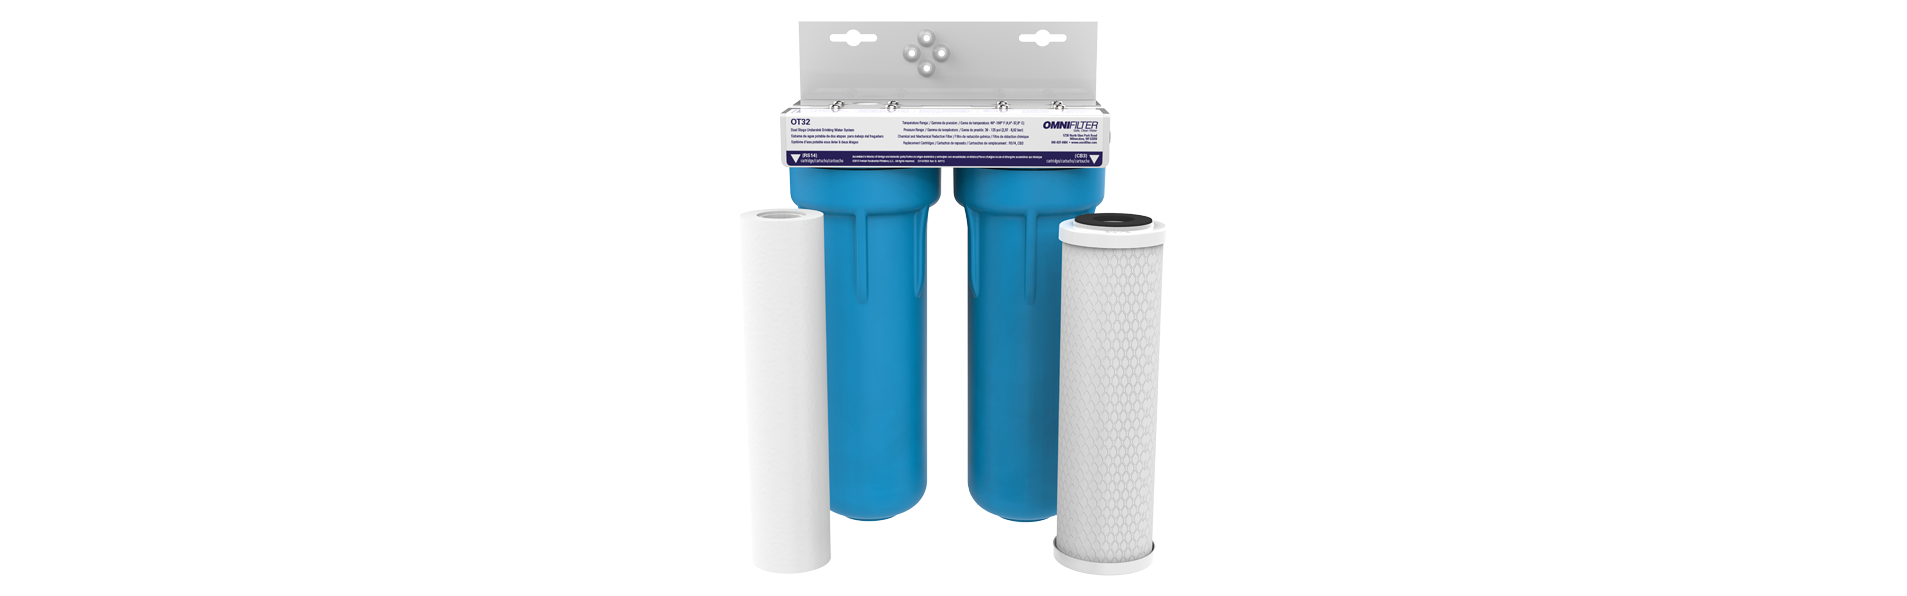 Pentair OMNIFIlter OT32 Water Filtration System, 10 Premium Dual-Stage  Undersink Filter System, NSF Certified to Reduce PFOA/PFOS, Includes Dual